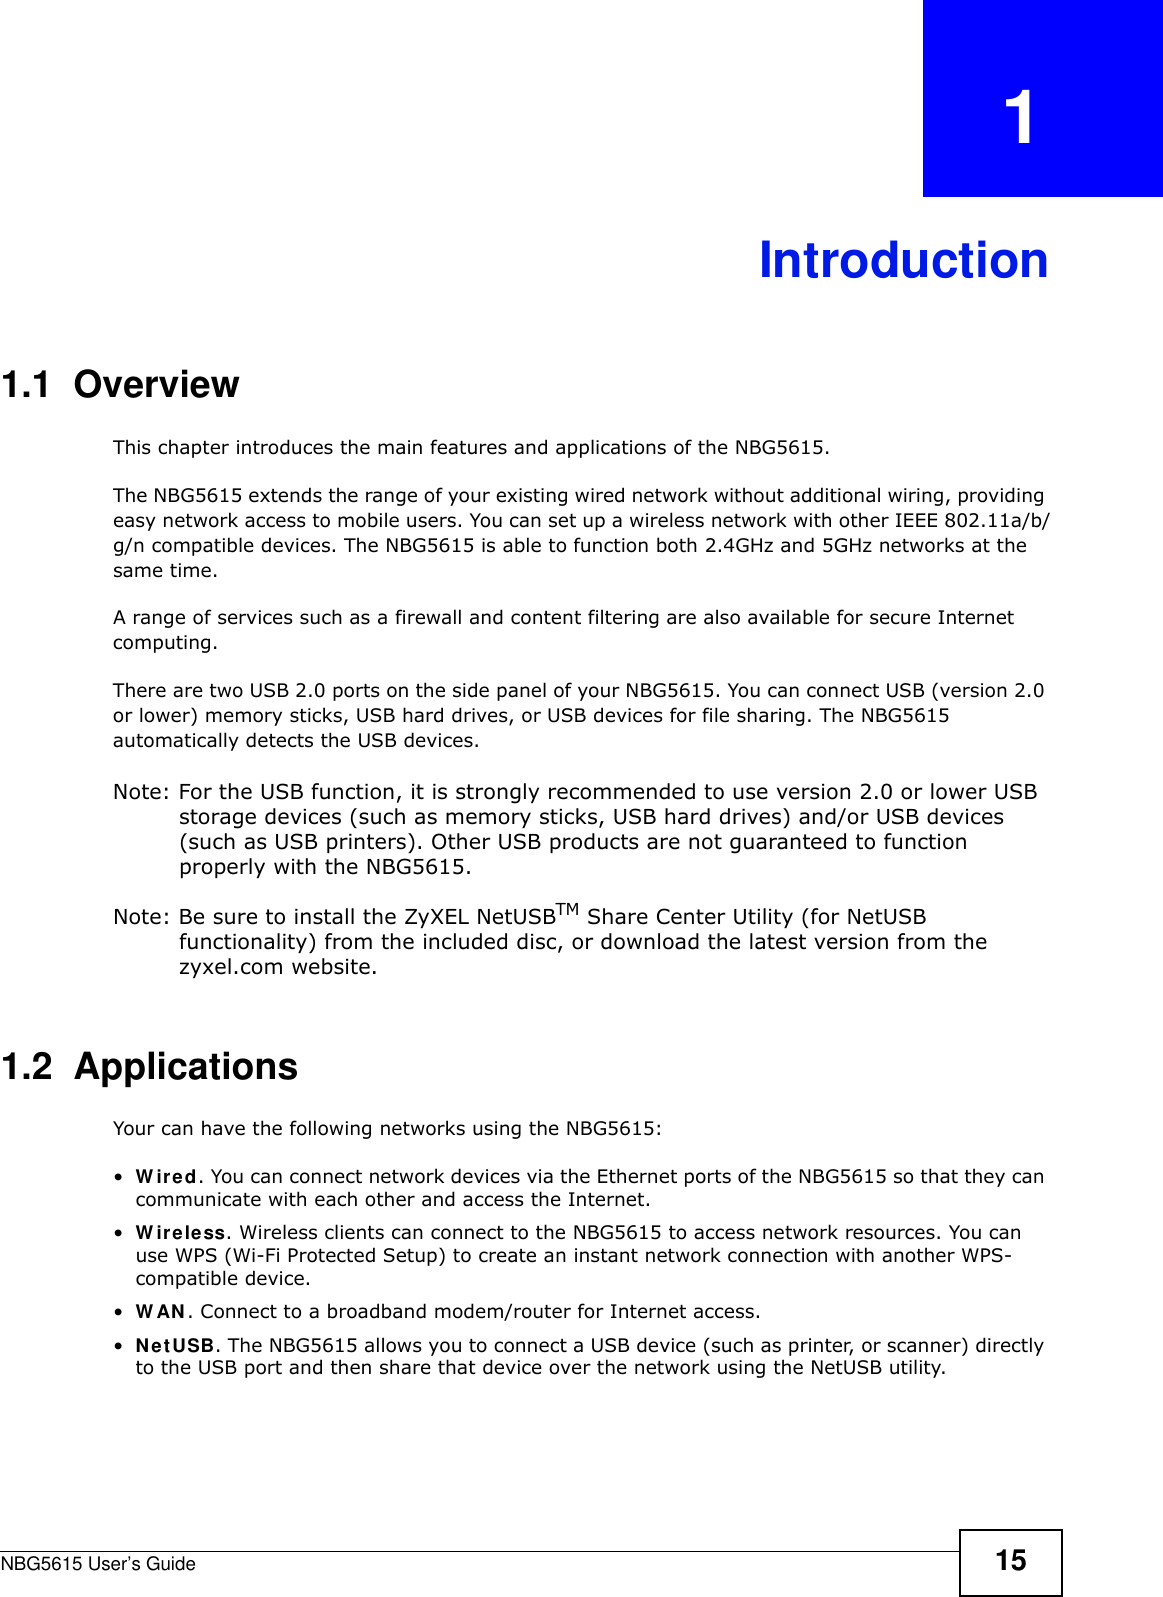 NBG5615 User’s Guide 15CHAPTER   1Introduction1.1  OverviewThis chapter introduces the main features and applications of the NBG5615.The NBG5615 extends the range of your existing wired network without additional wiring, providing easy network access to mobile users. You can set up a wireless network with other IEEE 802.11a/b/g/n compatible devices. The NBG5615 is able to function both 2.4GHz and 5GHz networks at the same time.A range of services such as a firewall and content filtering are also available for secure Internet computing. There are two USB 2.0 ports on the side panel of your NBG5615. You can connect USB (version 2.0 or lower) memory sticks, USB hard drives, or USB devices for file sharing. The NBG5615 automatically detects the USB devices. Note: For the USB function, it is strongly recommended to use version 2.0 or lower USB storage devices (such as memory sticks, USB hard drives) and/or USB devices (such as USB printers). Other USB products are not guaranteed to function properly with the NBG5615.Note: Be sure to install the ZyXEL NetUSBTM Share Center Utility (for NetUSB functionality) from the included disc, or download the latest version from the zyxel.com website.1.2  ApplicationsYour can have the following networks using the NBG5615:•W ired. You can connect network devices via the Ethernet ports of the NBG5615 so that they can communicate with each other and access the Internet.•W ireless. Wireless clients can connect to the NBG5615 to access network resources. You can use WPS (Wi-Fi Protected Setup) to create an instant network connection with another WPS-compatible device.•W AN. Connect to a broadband modem/router for Internet access.•NetUSB. The NBG5615 allows you to connect a USB device (such as printer, or scanner) directly to the USB port and then share that device over the network using the NetUSB utility. 